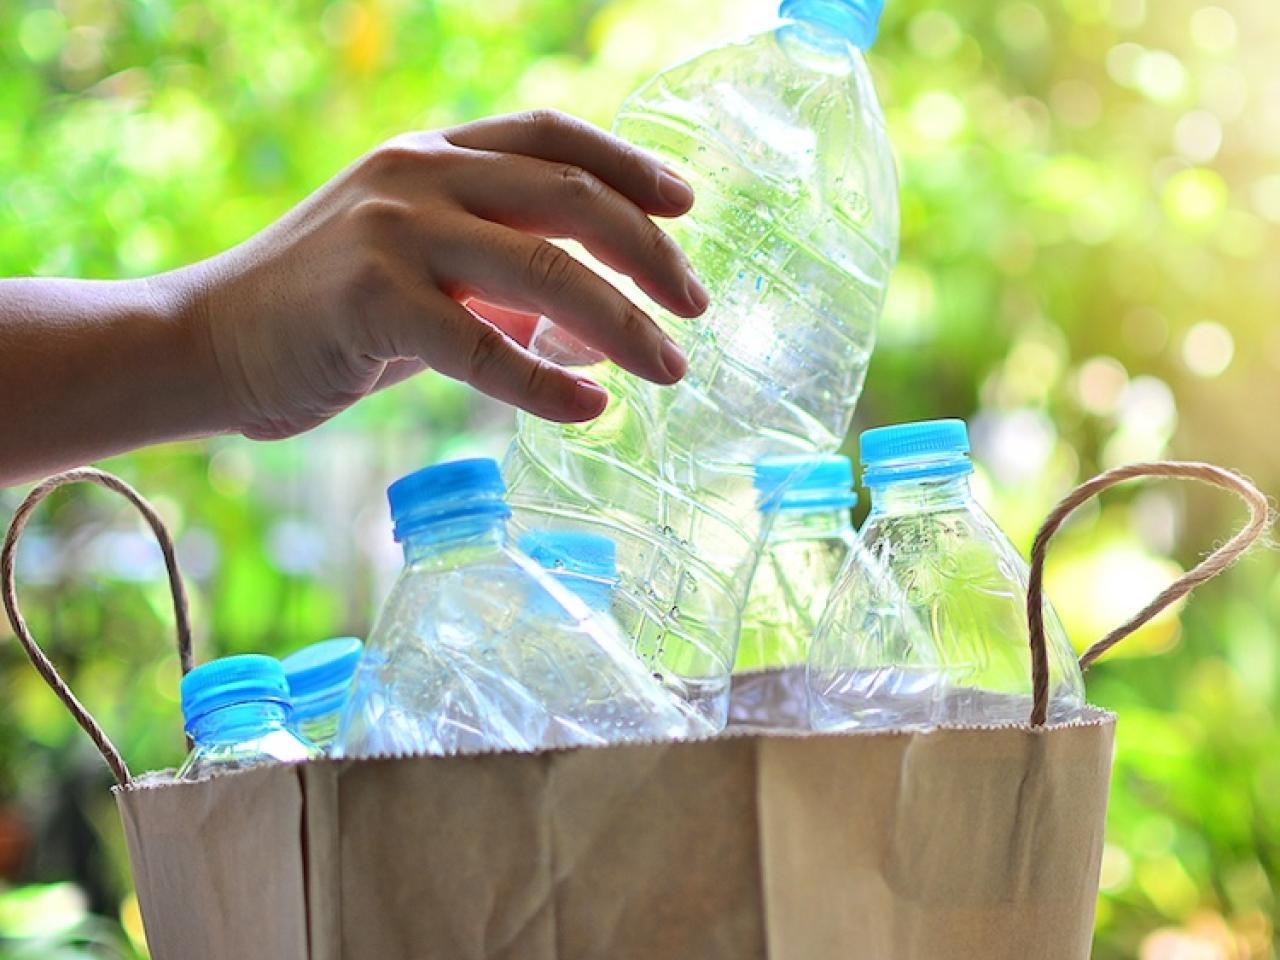 Empty plastic bottles being put into a recycling bag.